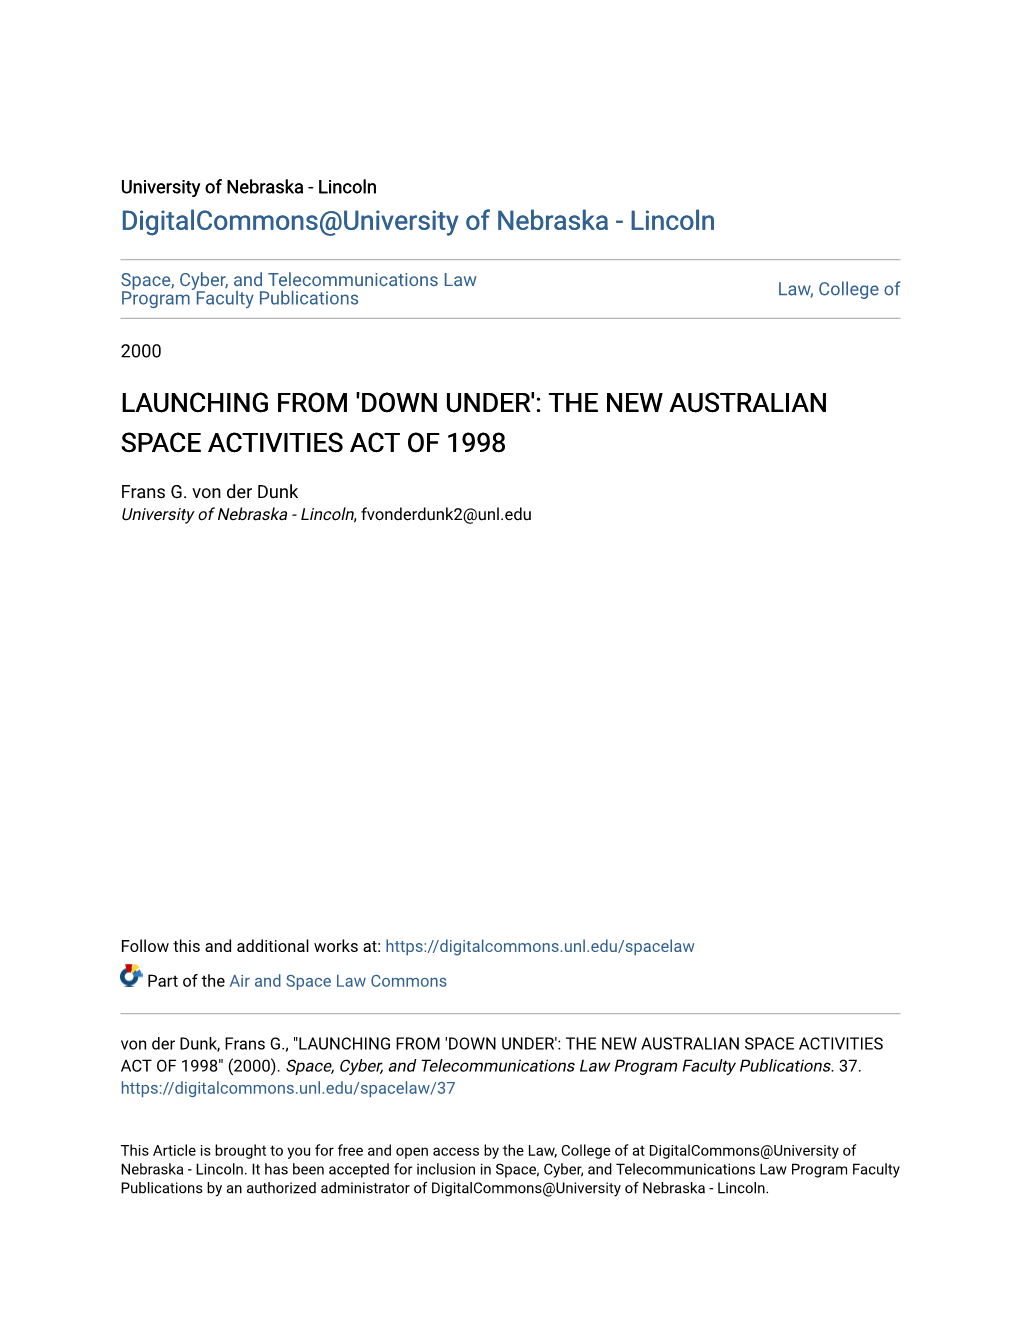 Launching from 'Down Under': the New Australian Space Activities Act of 1998